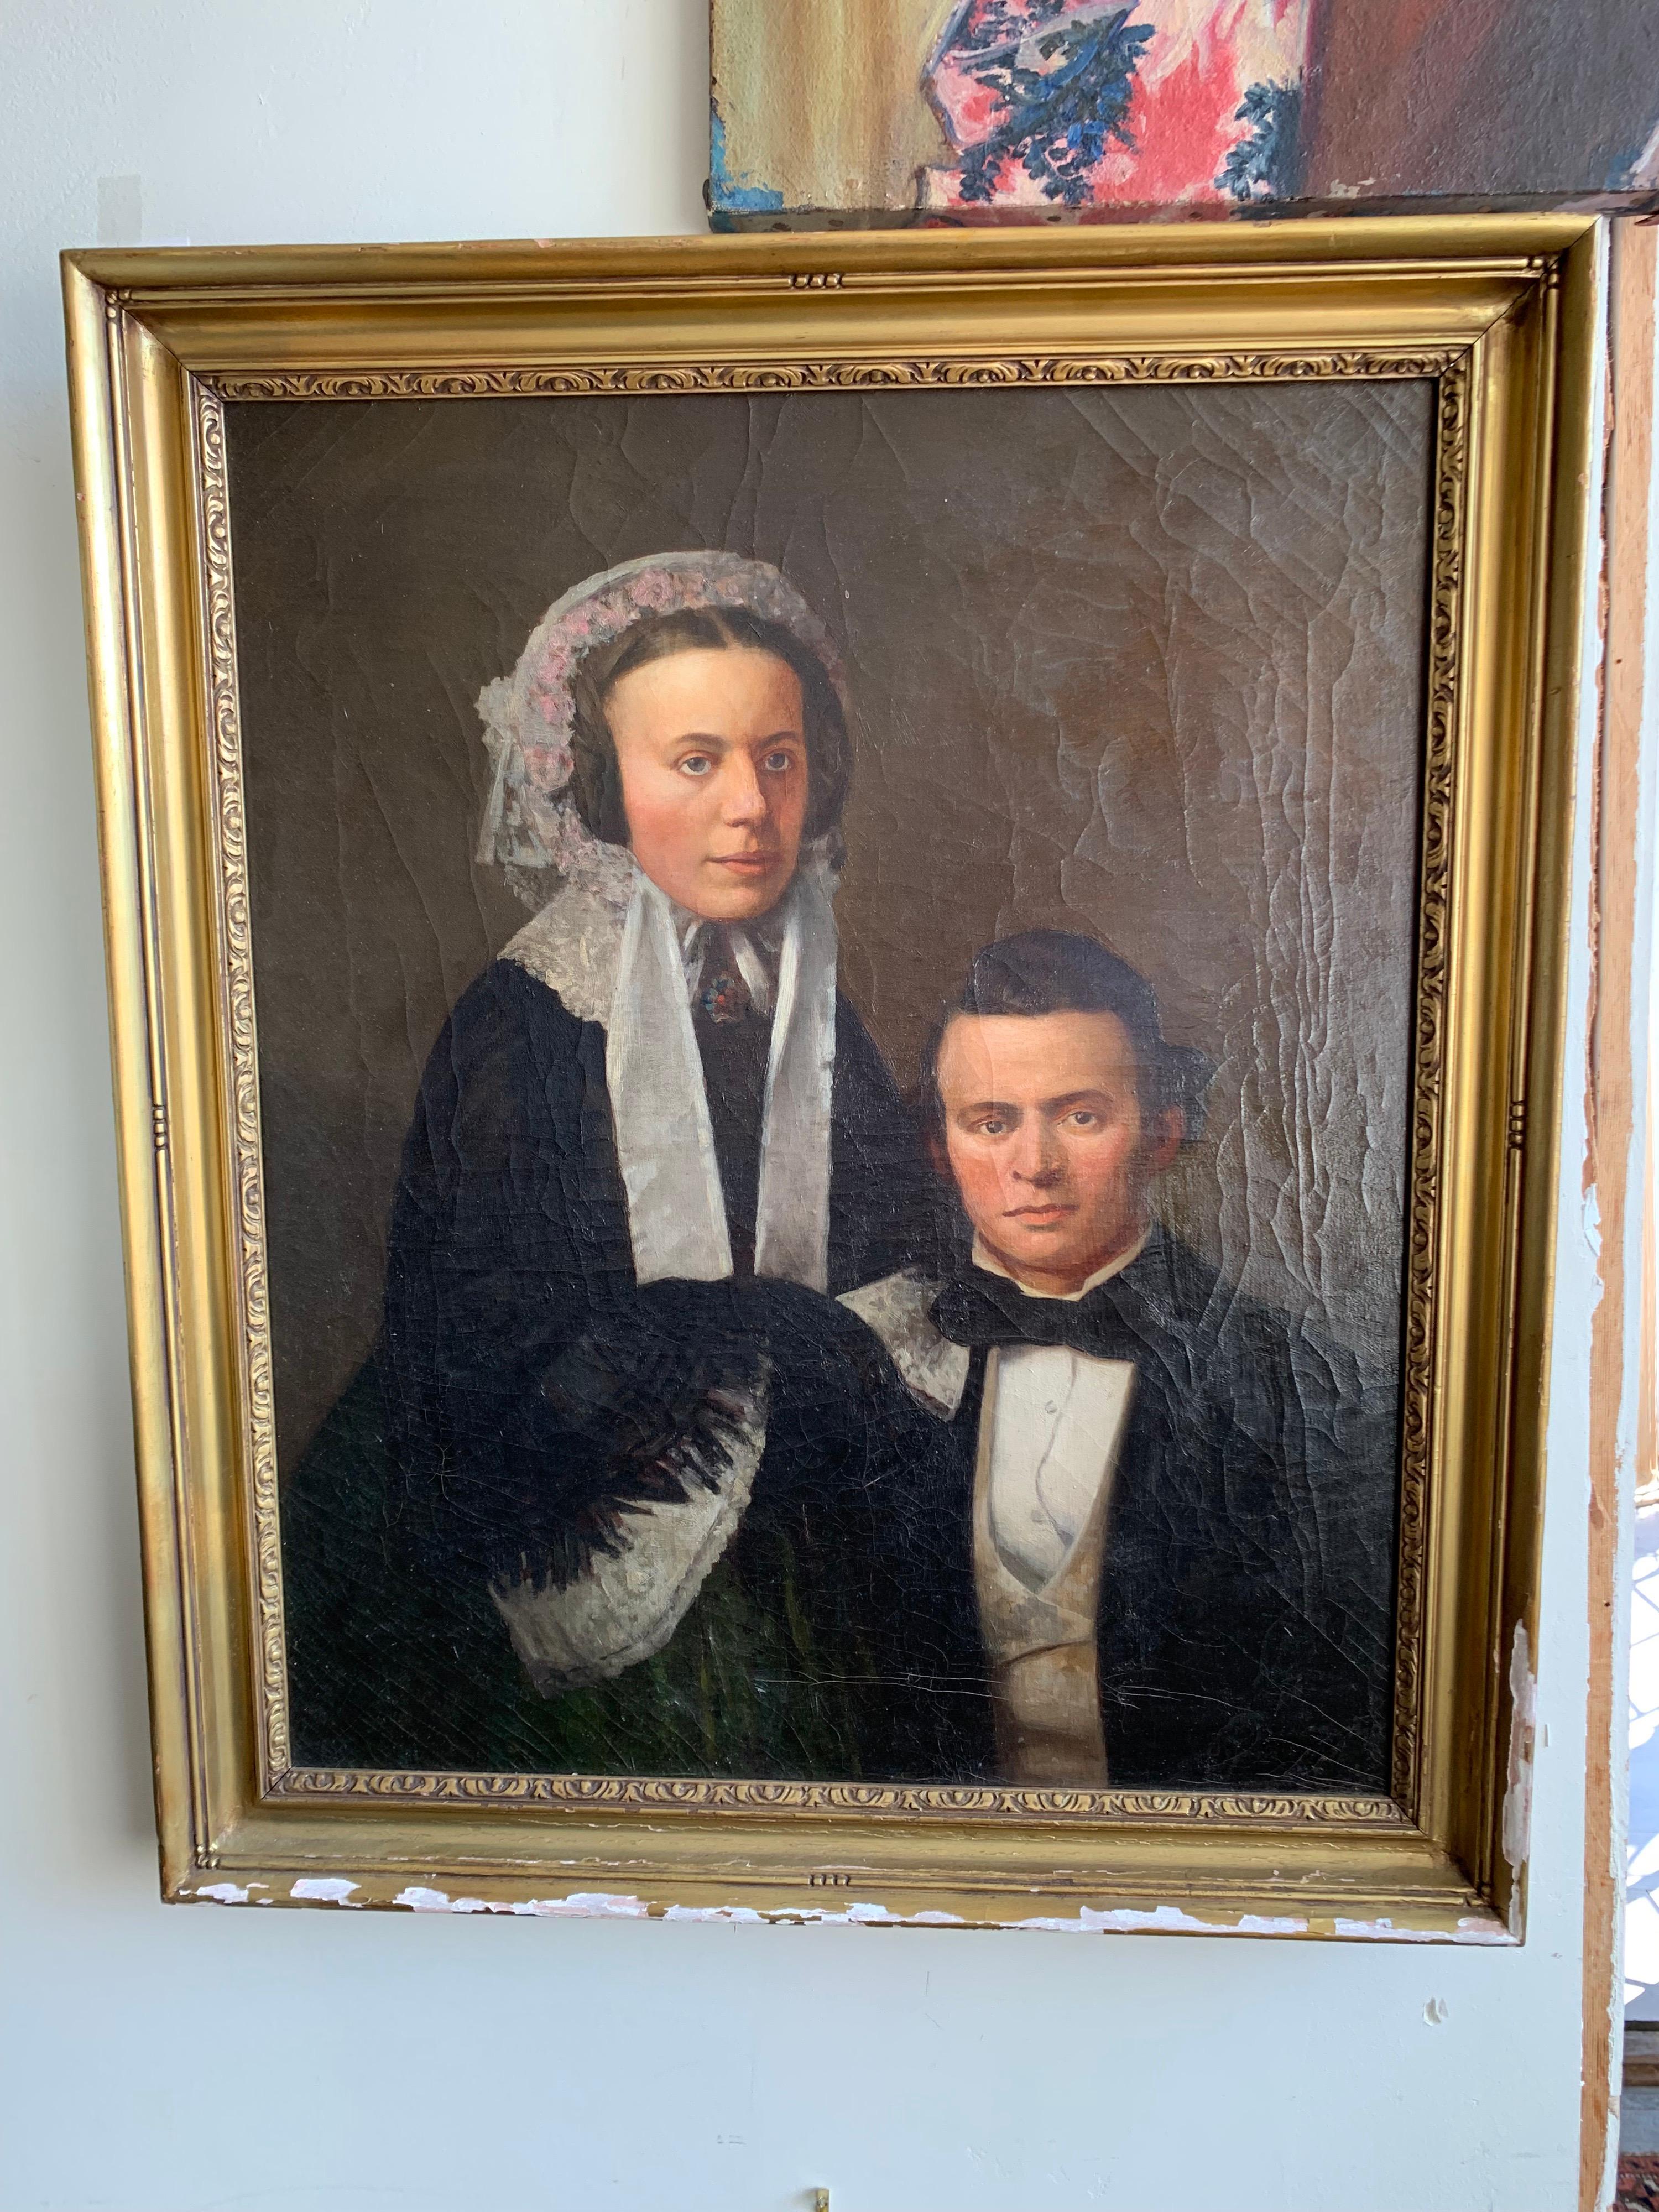 Early 19th century oil painting portrait of a seated man with a woman. They are dressed in formal attire with expressions that are almost detached. They both exude an air of grace and elegance. The painting is signed illegibly lower right and is